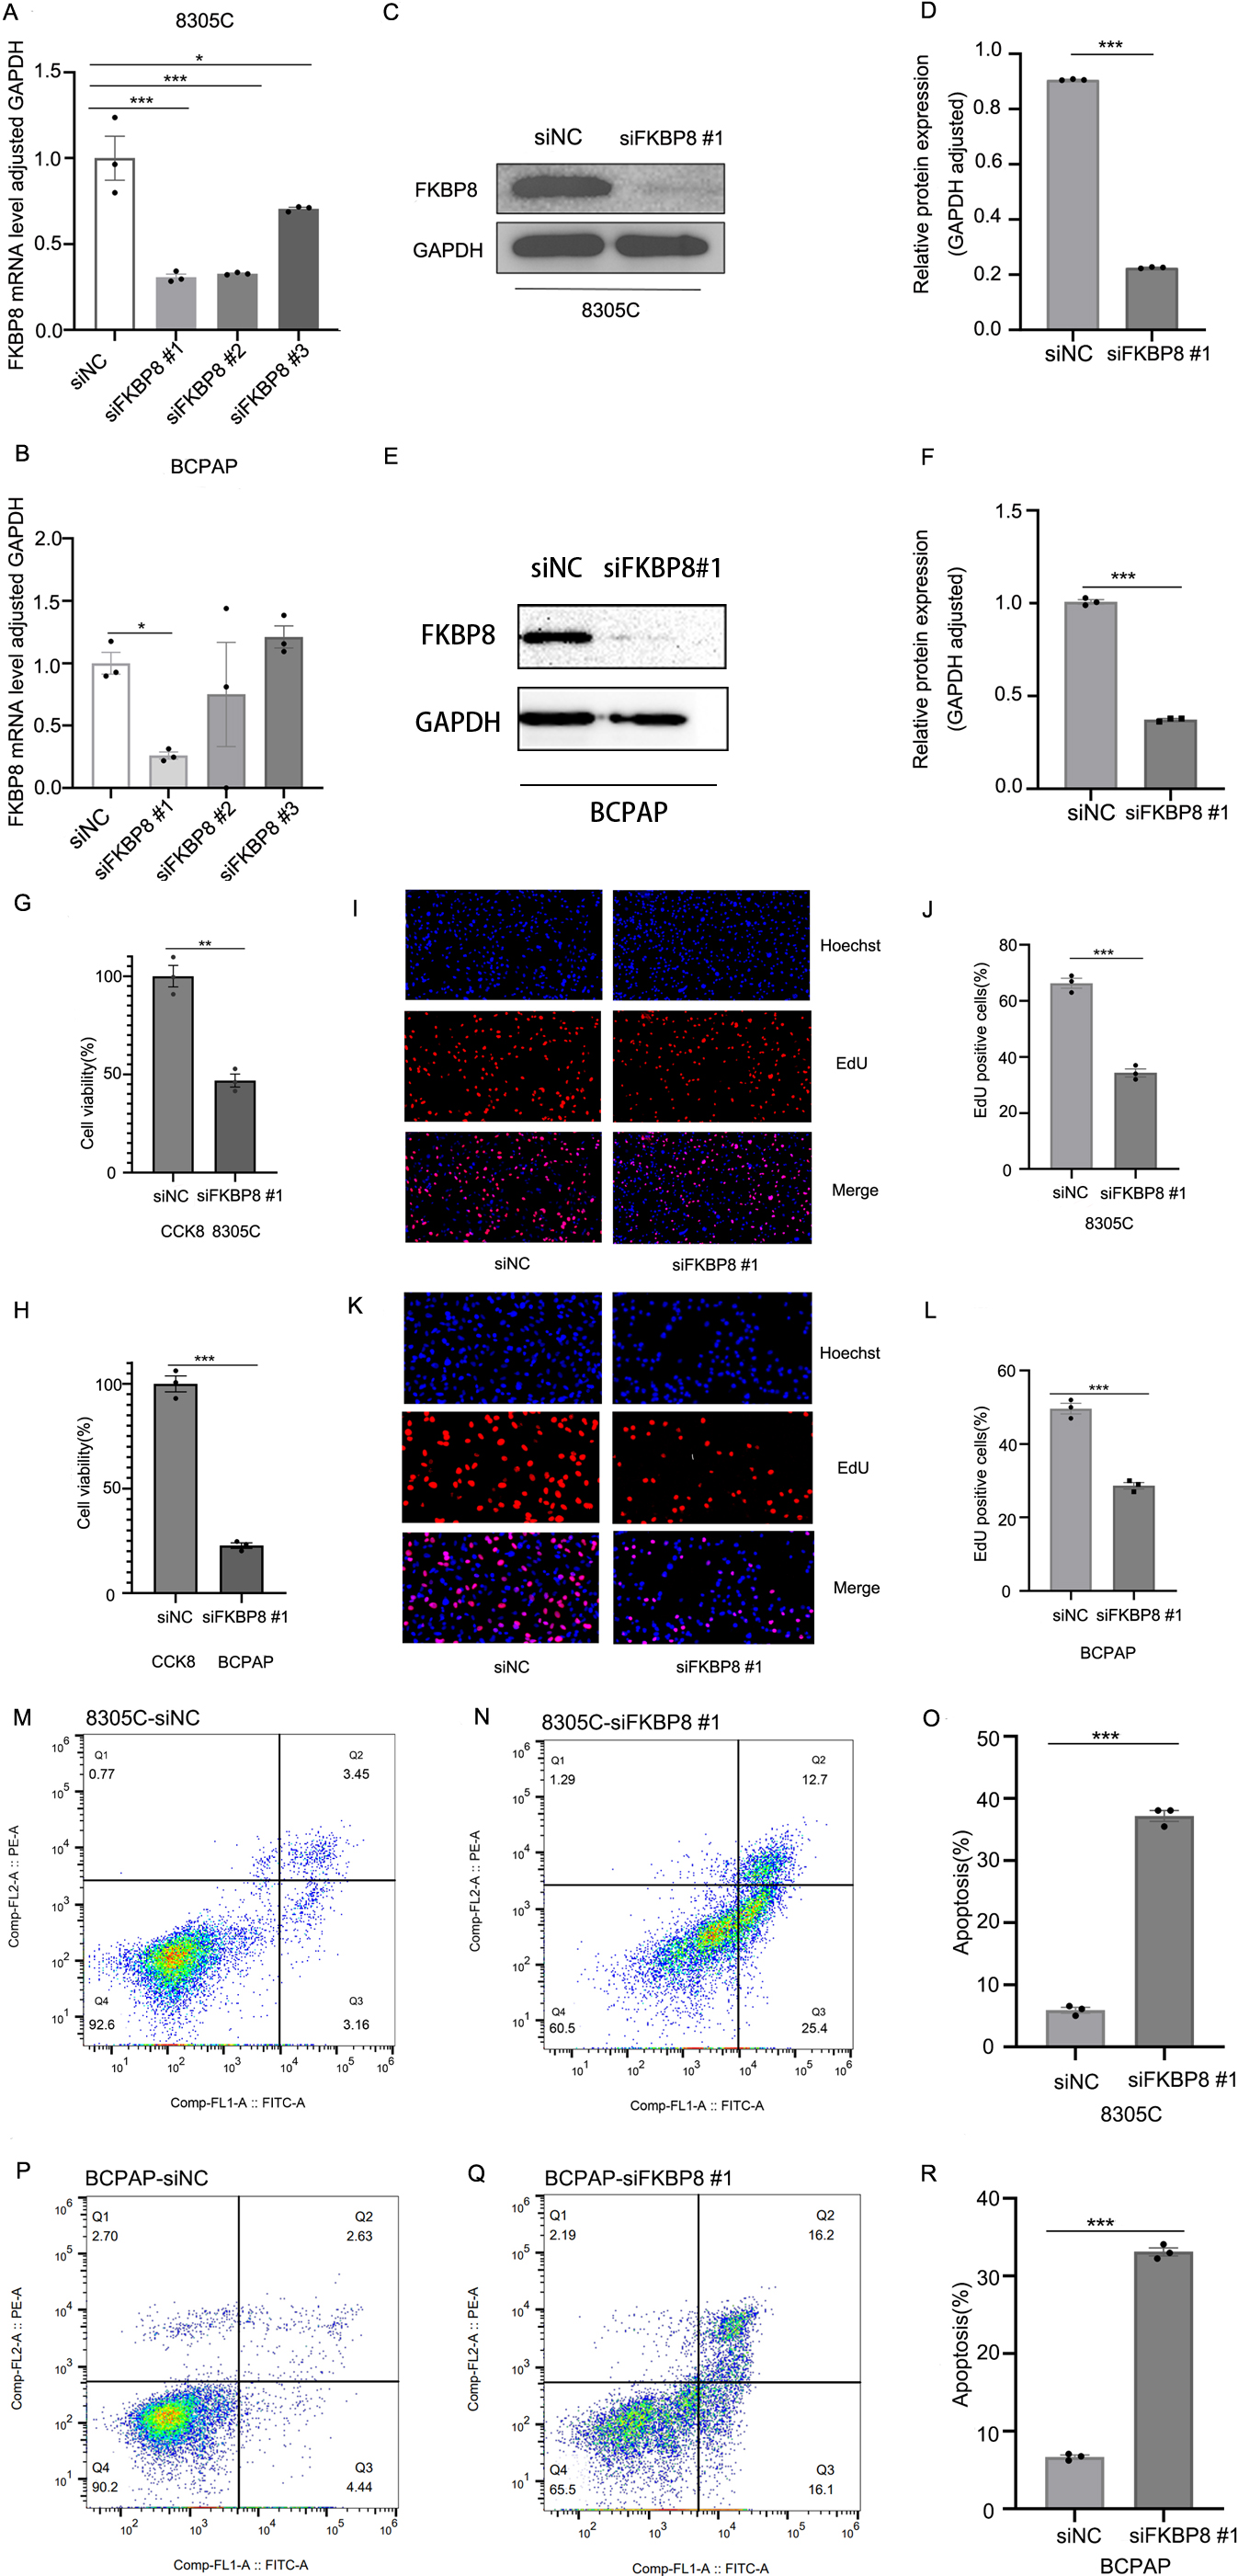 Knockdown of FKBP8 expression suppresses the cell proliferation and induces apoptosis in TC cells. The expression of FKBP8 mRNA and protein was detected in both 8305C and BCPAP cells transfected with FKBP8 siRNAs (siFKBP8) or negative control siRNA (siNC) using RT-qPCR (A, B) and western blot analysis (C-F), respectively. Data are represented as mean ± SD from three independent experiments (*P < 0.05 and ***P < 0.001). (G, H) The cell proliferation was determined in 8305C and BCPAP cells transfected with siFKBP8 or siNC using CCK-8 assays. Data are represented as mean ± SD from three independent experiments (**P < 0.01 and ***P < 0.001). (H-L) The EdU assays were used to calculate the cell proliferation in 8305C and BCPAP cells transfected with siFKBP8 or siNC. Data are represented as mean ± SD from three independent experiments (***P < 0.001). (M-R) The flow-cytometry-based apoptosis assay was performed in 8305C and BCPAP cells transfected with siFKBP8 or siNC. Data are represented as mean ± SD from three independent experiments (***P < 0.001).